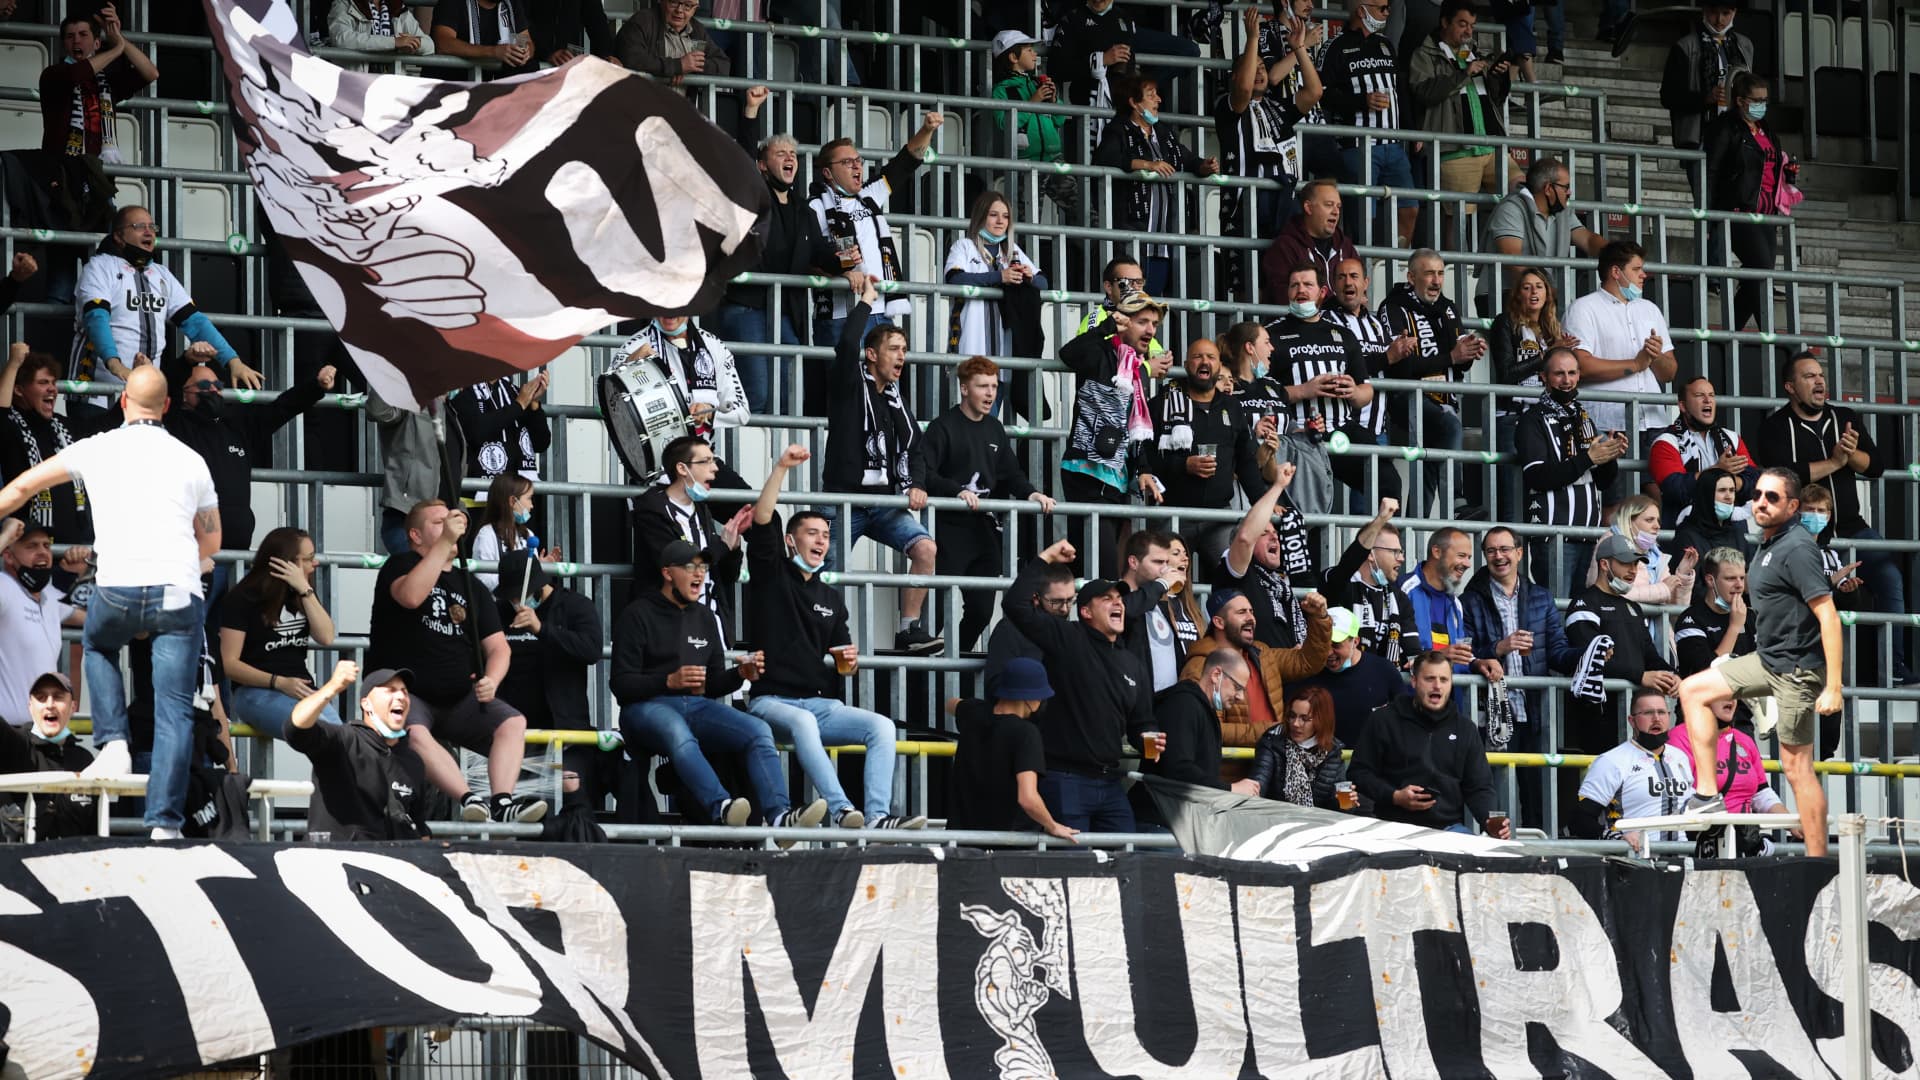 Charleroi, one of the Belgian soccer clubs introducing separate stands for unvaccinated fans.